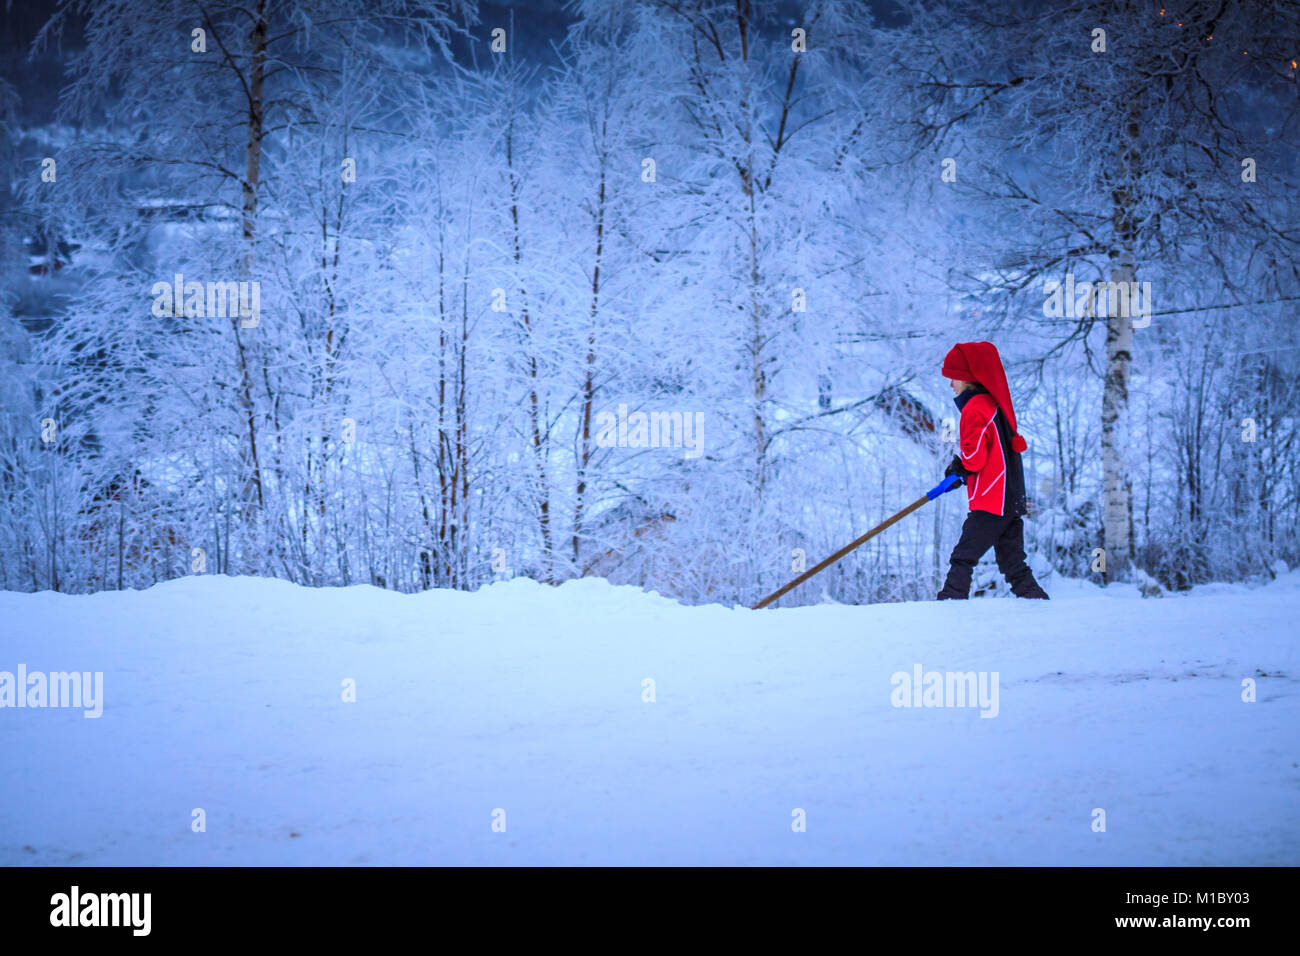 Young girl shoveling snow, in front of dense snowy forest. Person dressed in saturated red clothes and a long woolen cap. Stock Photo